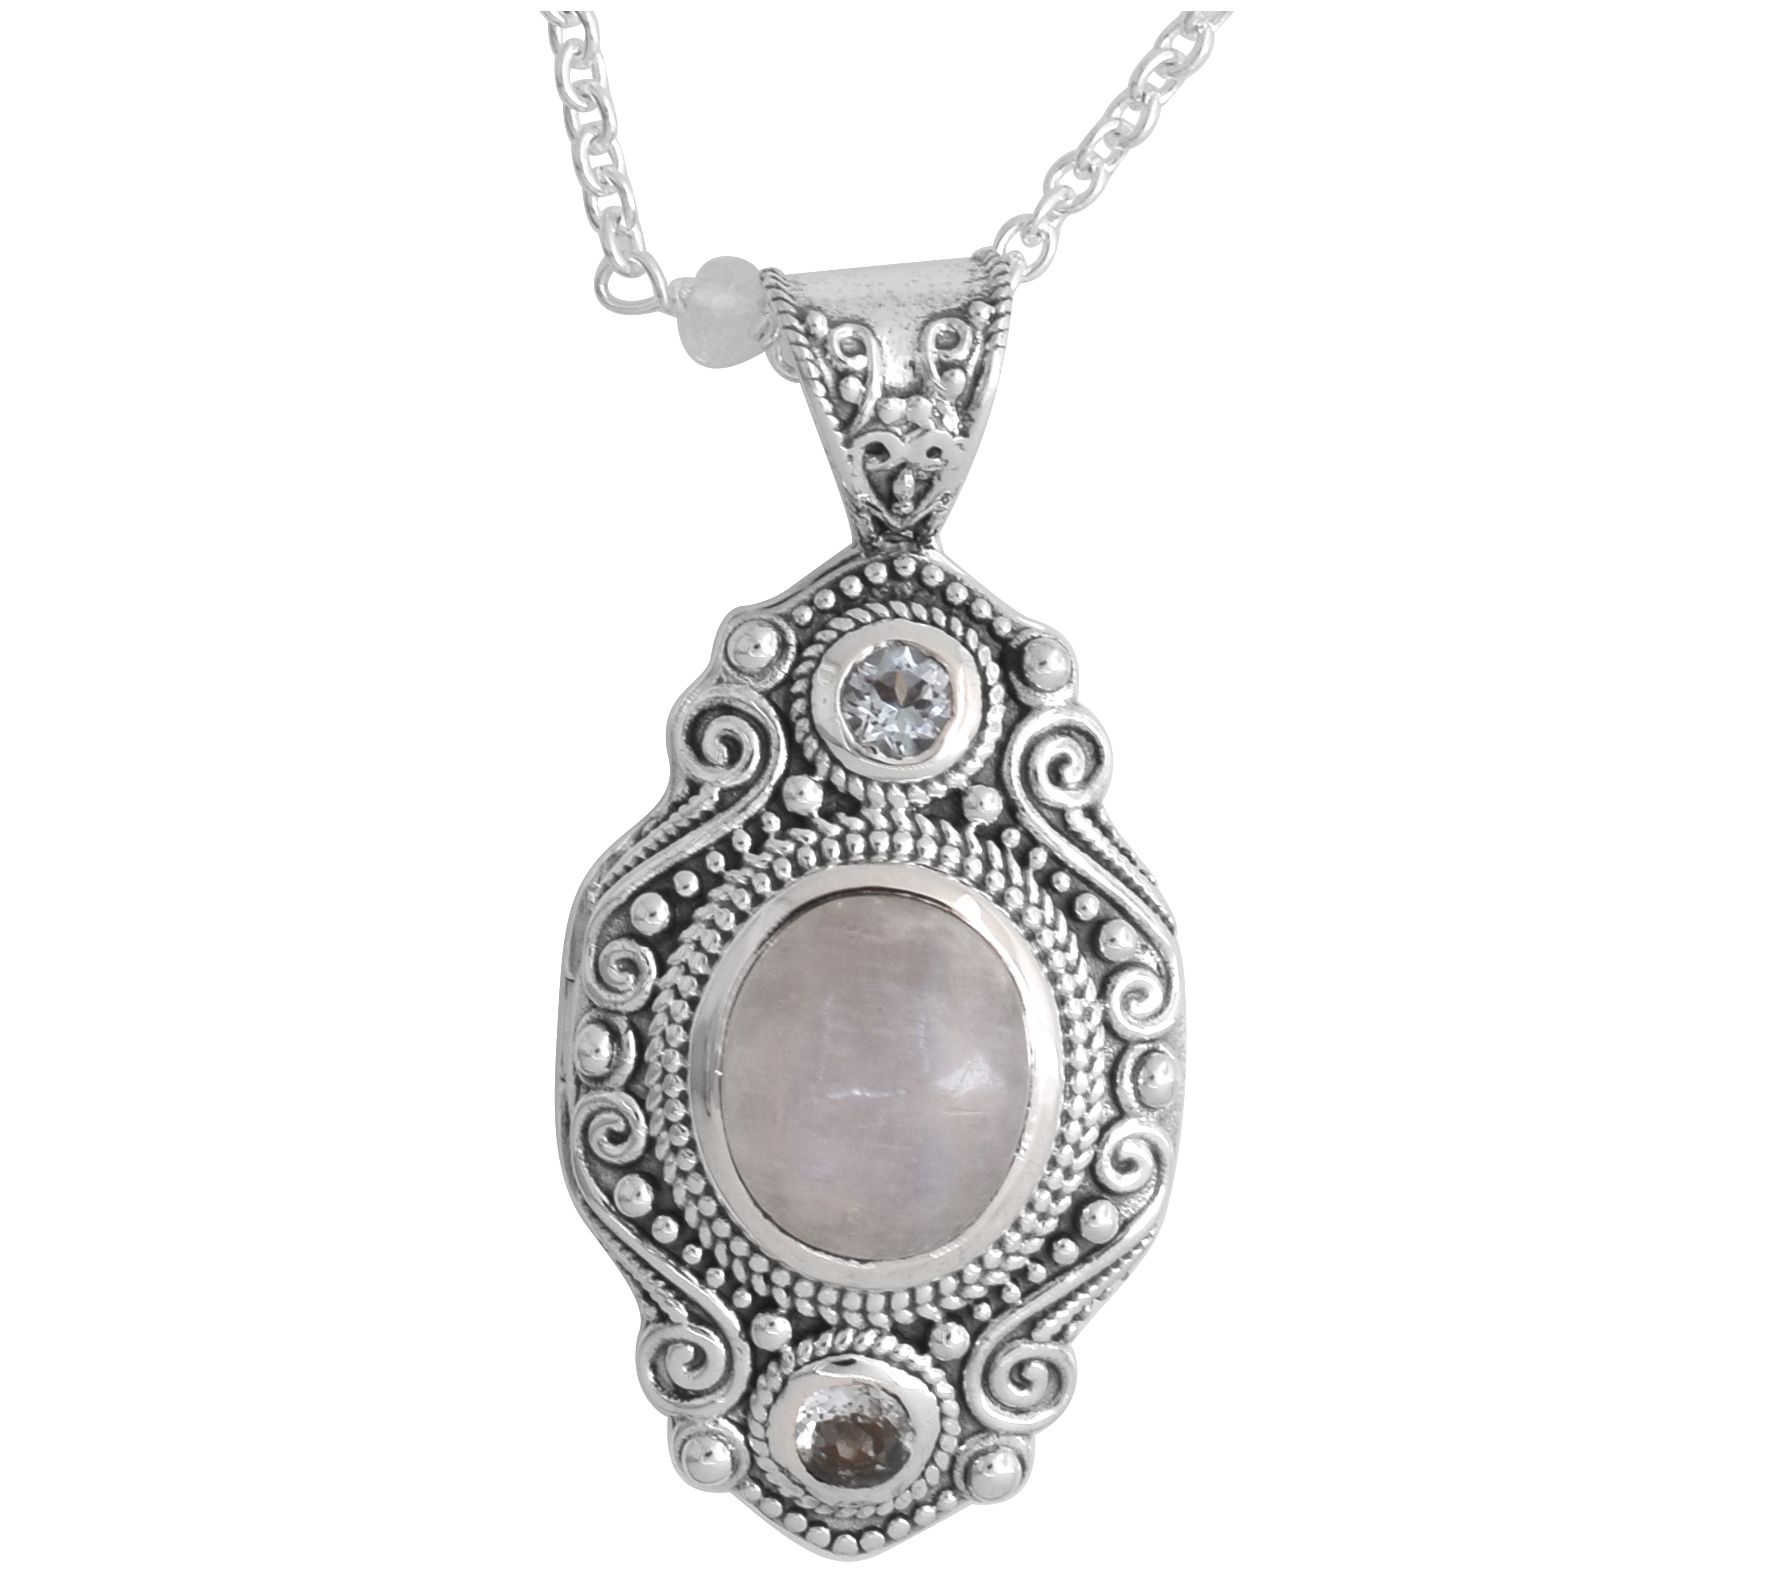 Unique Bargains 925 Sterling Silver Moonstone Necklace Chain For